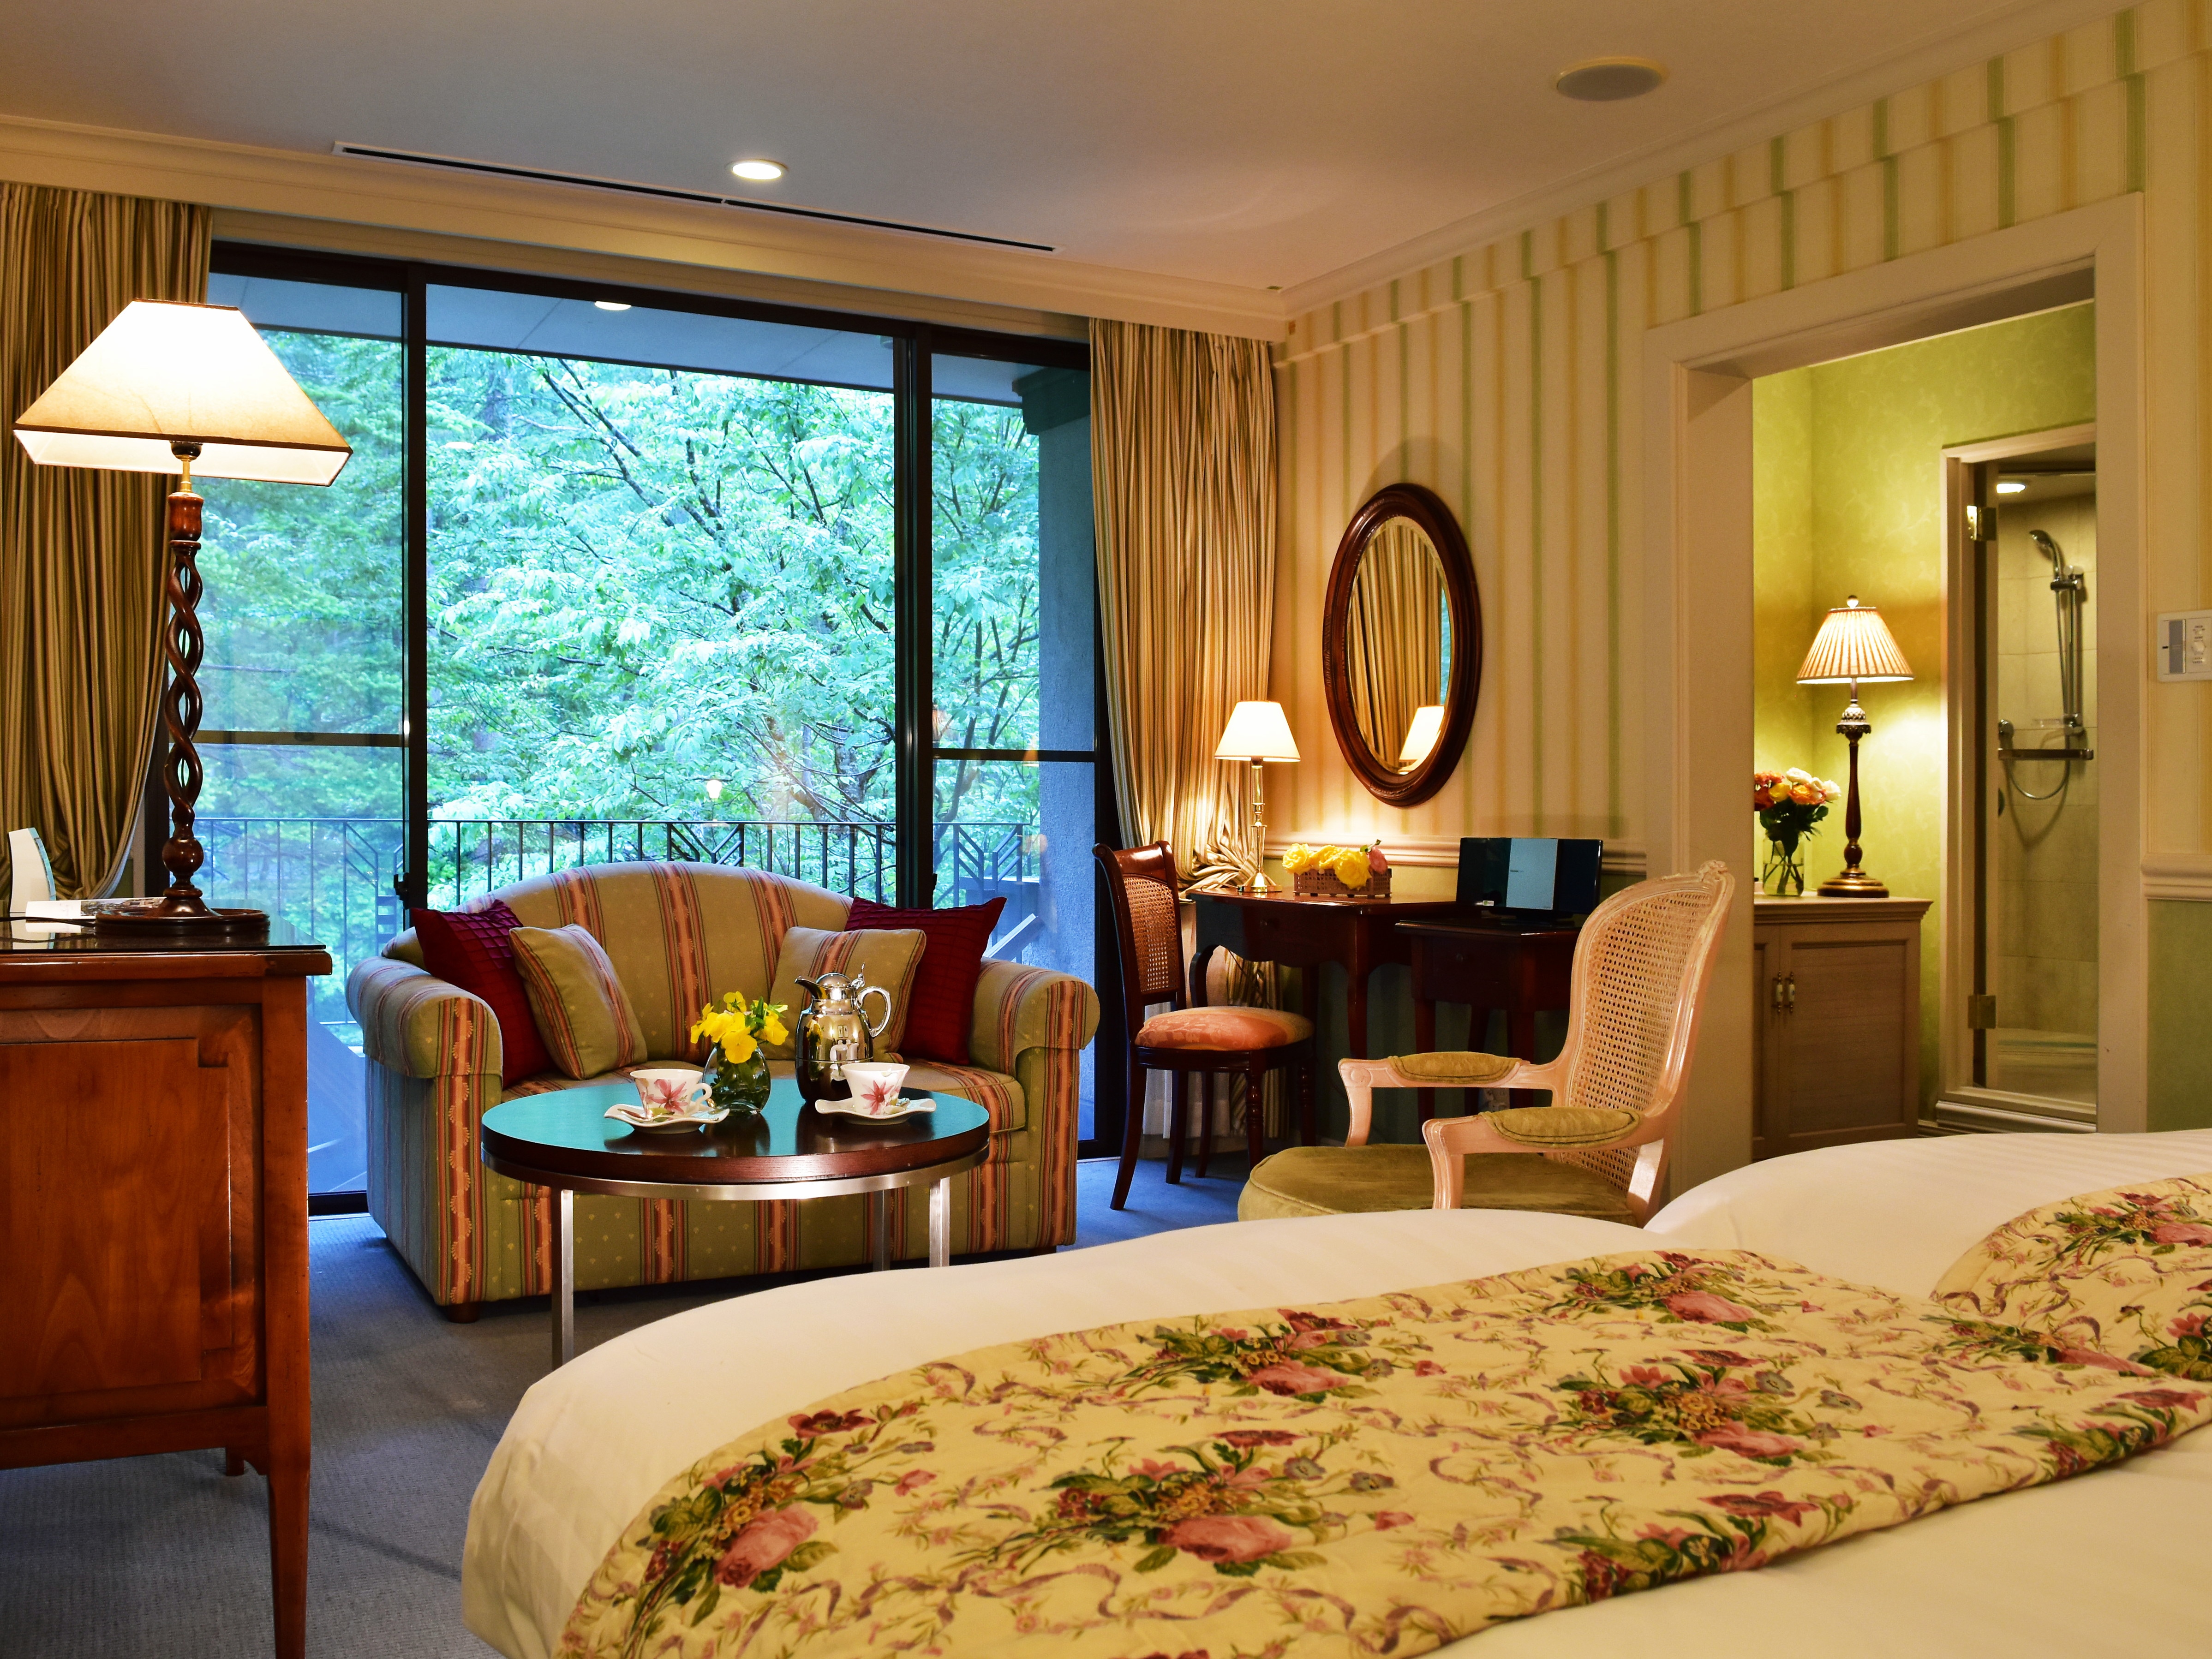 An example of a deluxe room